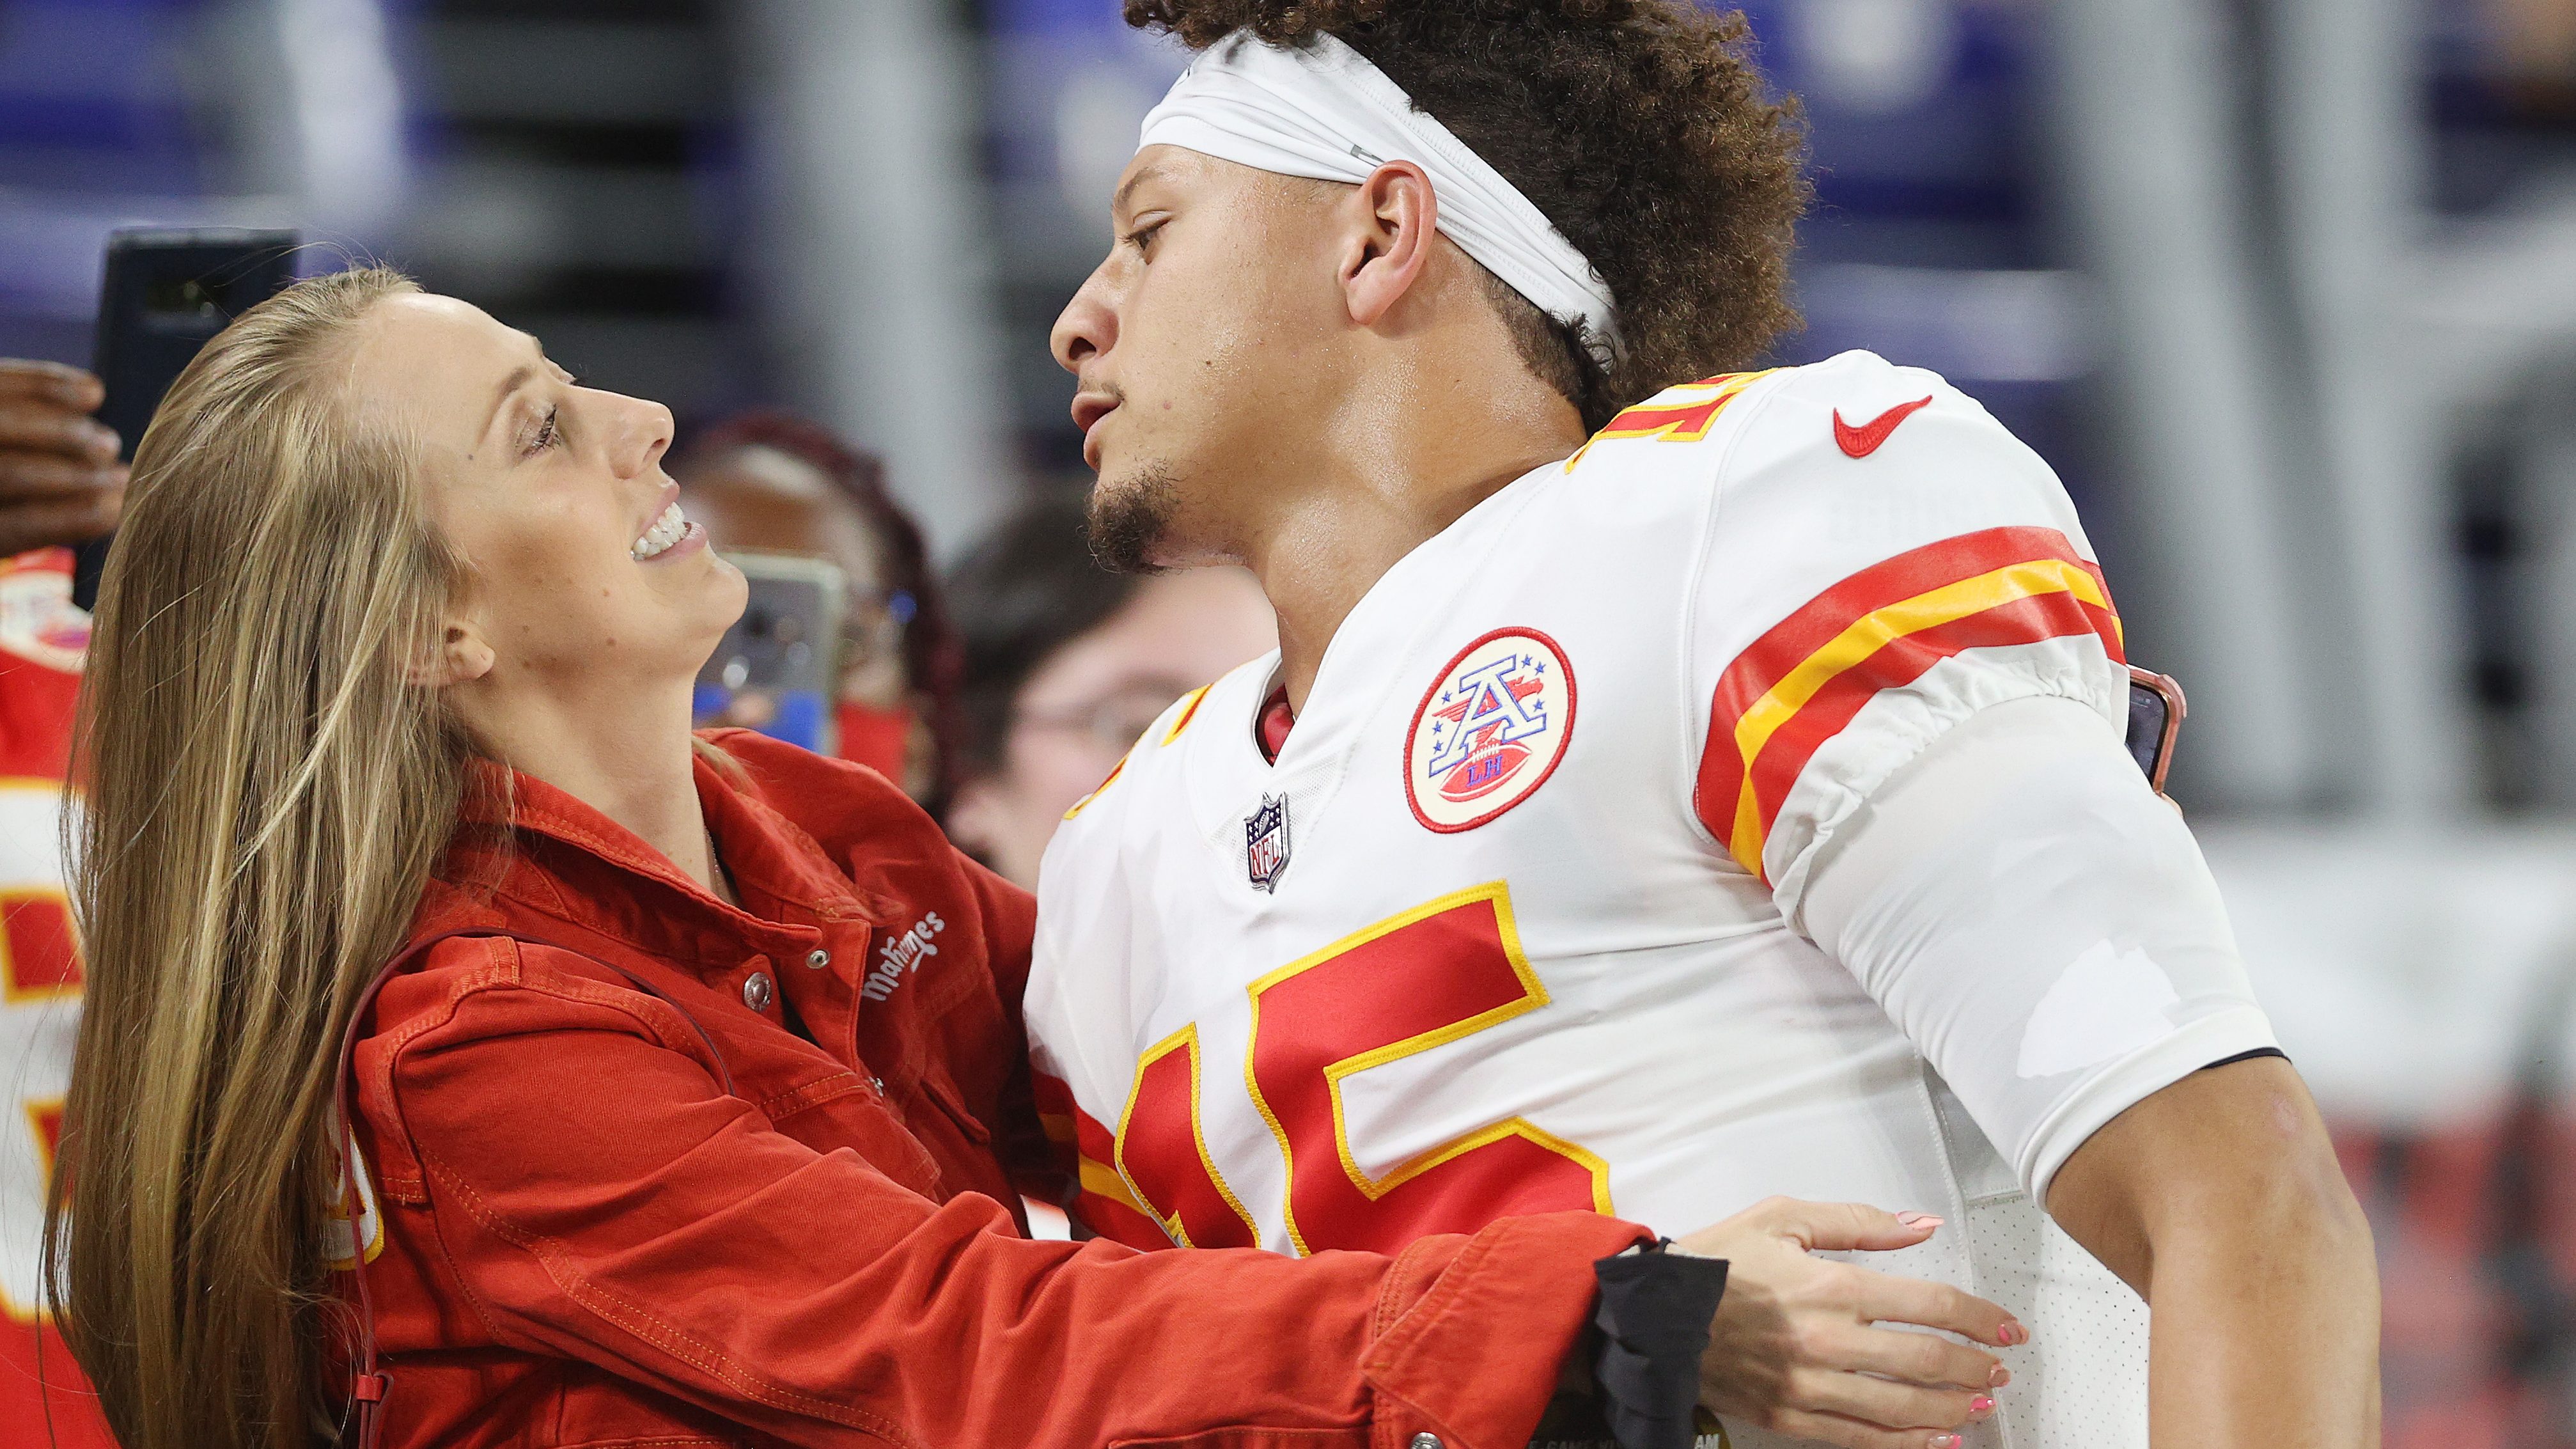 Brittany Mahomes Goes Fiery Red in Spiked Louboutins to KC Chiefs